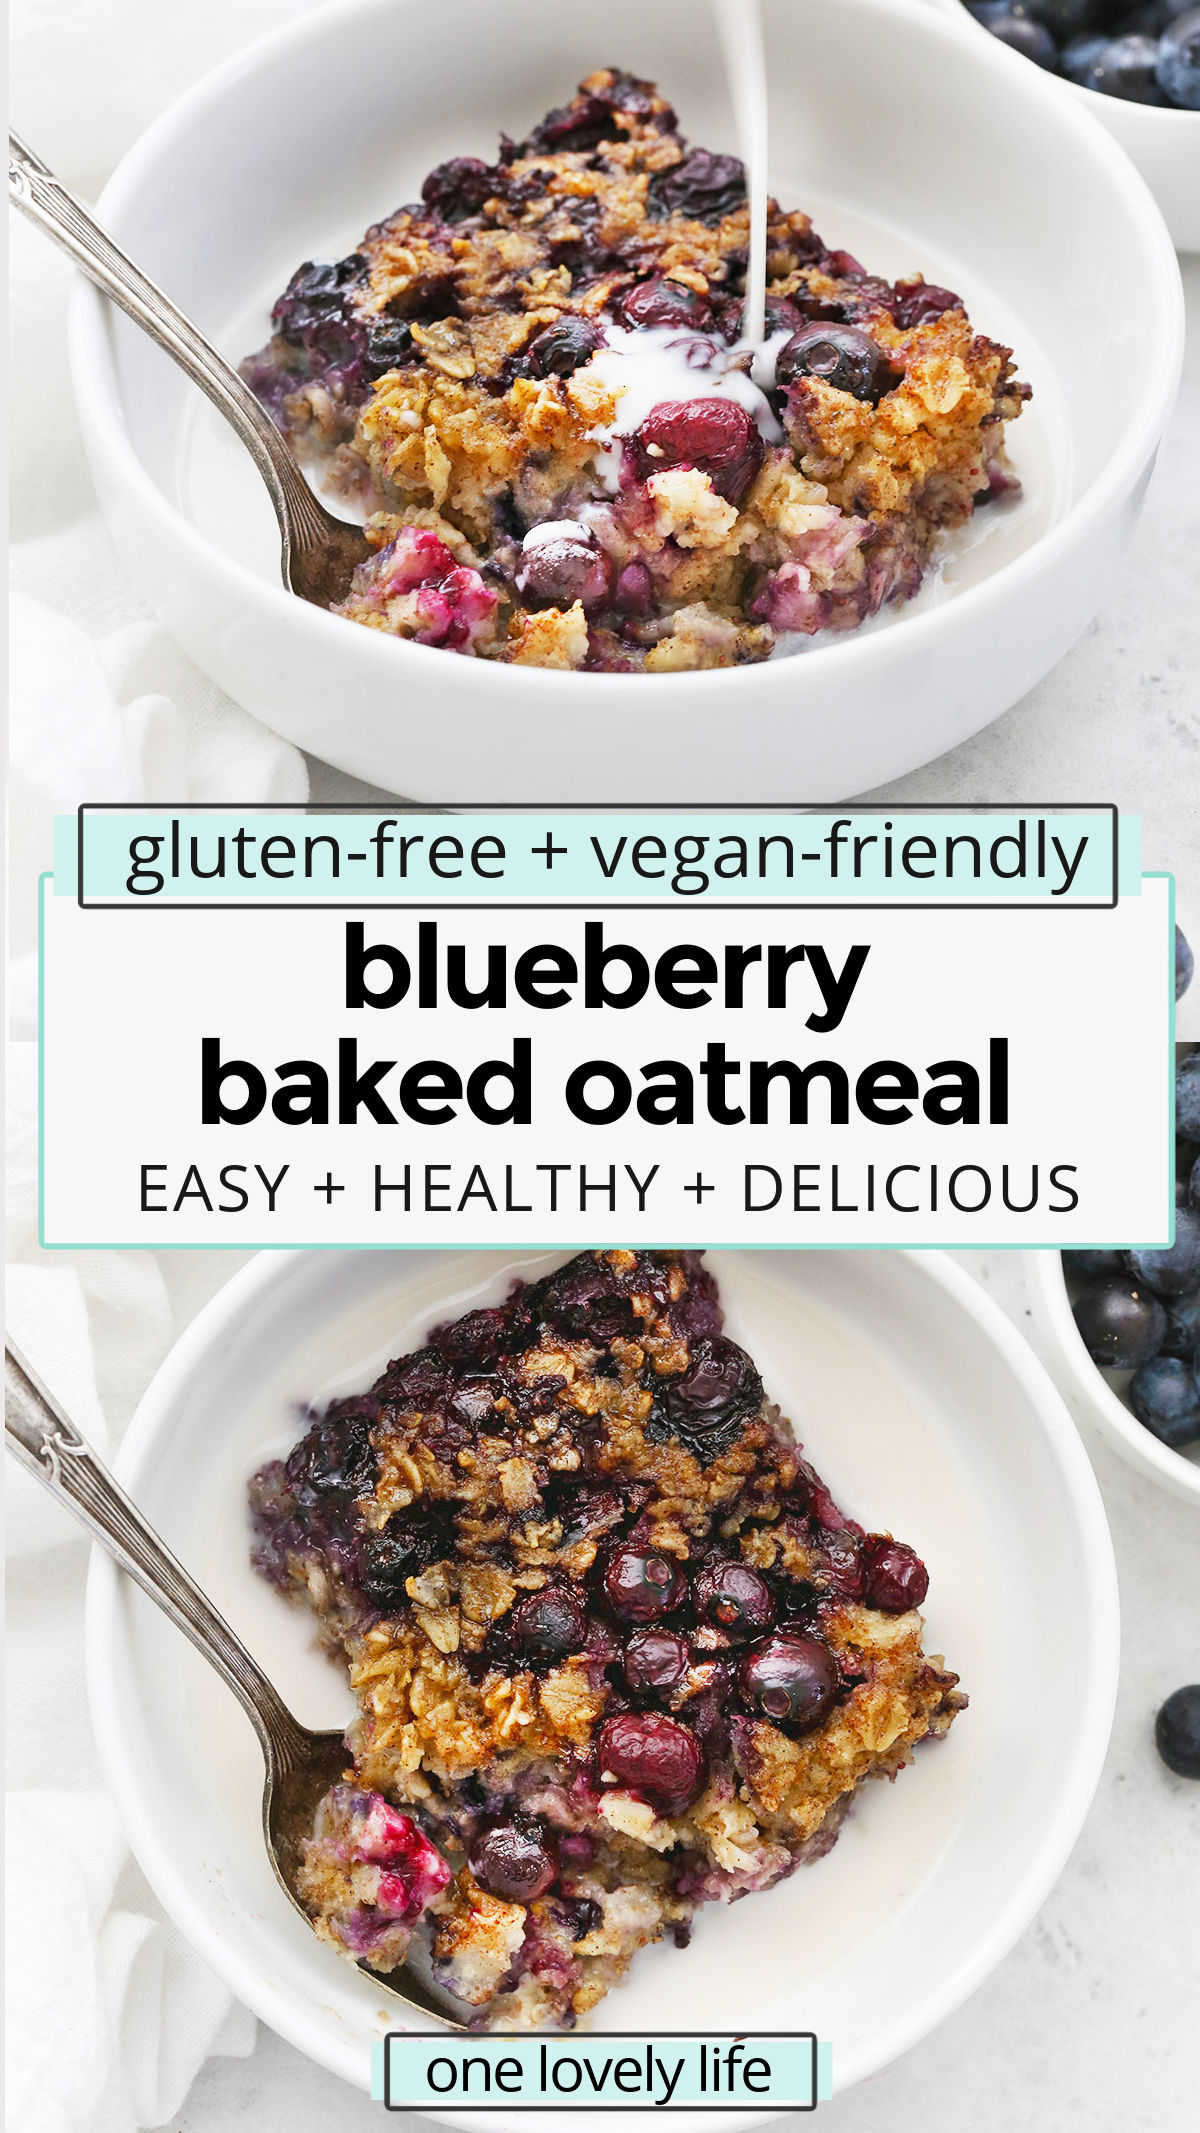 Baked Blueberry Oatmeal - Cozy baked oatmeal with plenty of blueberries and warm spices. This baked oatmeal recipe is perfect for meal-prep, lazy weekends, and feeding a crowd! // Baked Blueberry Oatmeal // Baked oatmeal recipe // meal prep breakfast // blueberry oatmeal // blueberry oatmeal bake // vegan breakfast // healthy breakfast // gluten free breakfast //